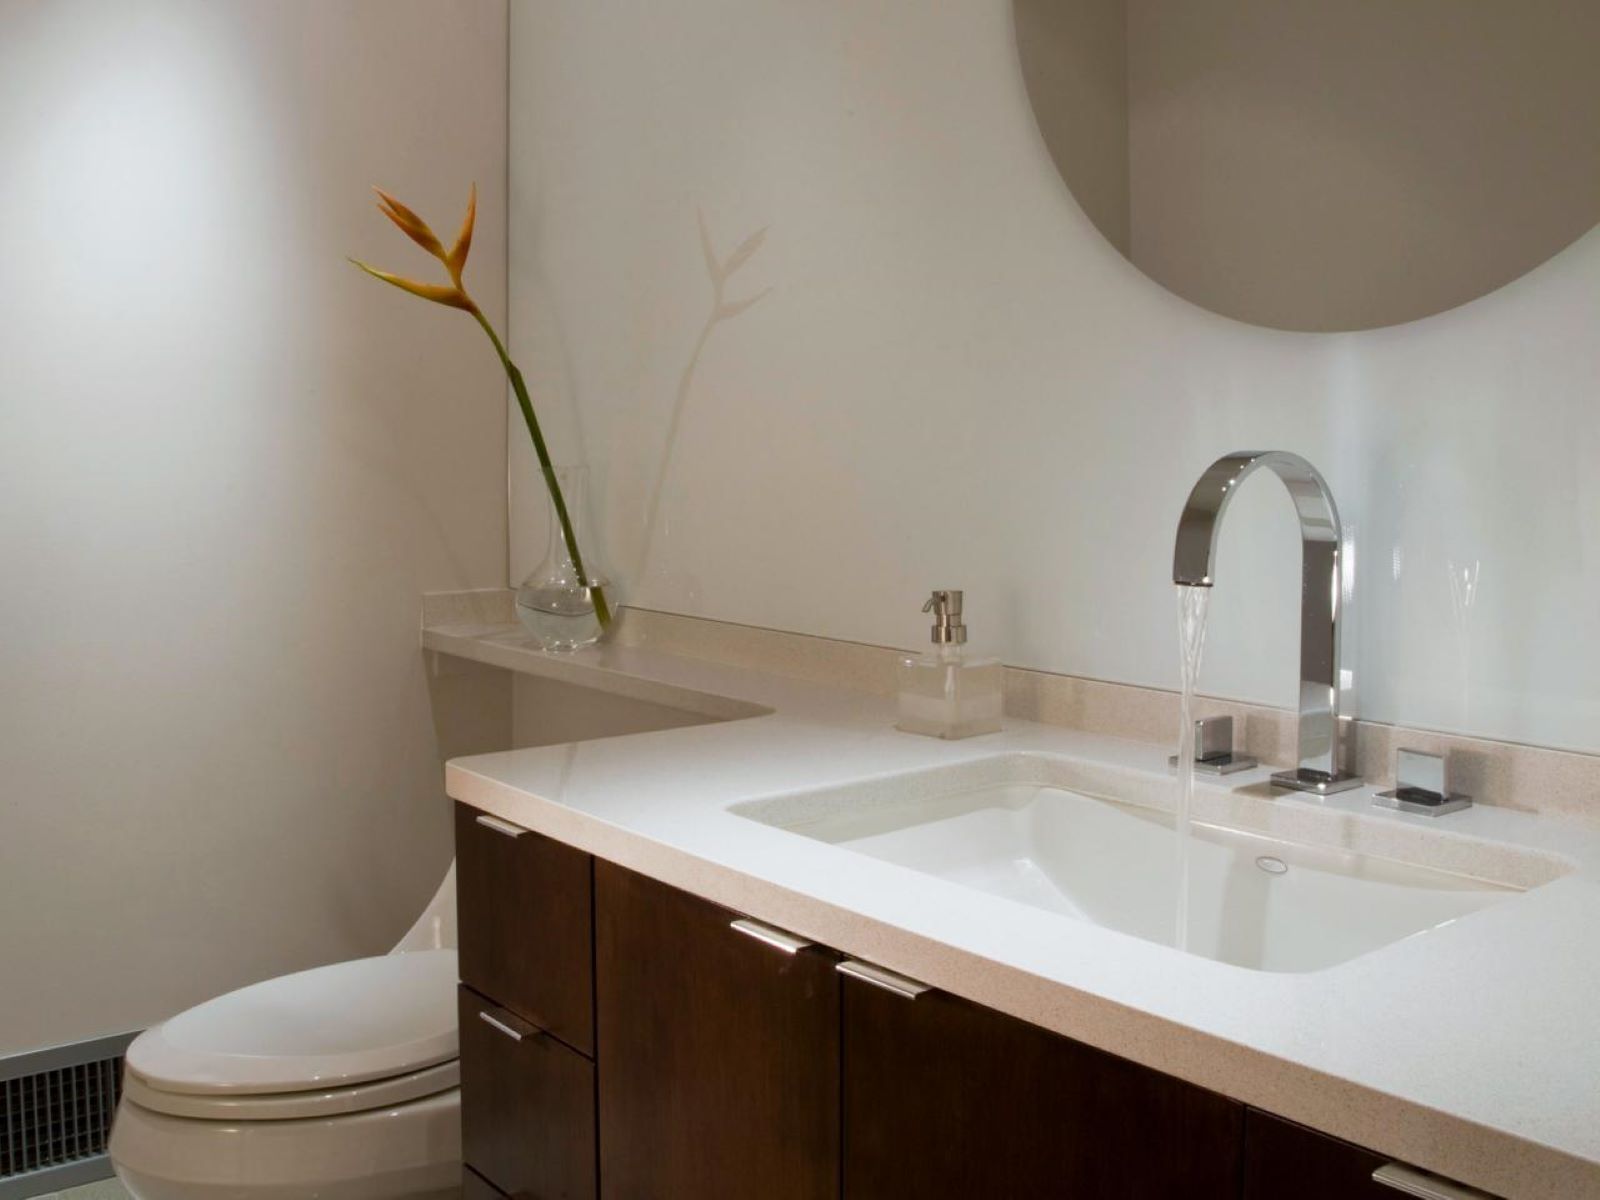 What Is The Best Material For Bathroom Countertops